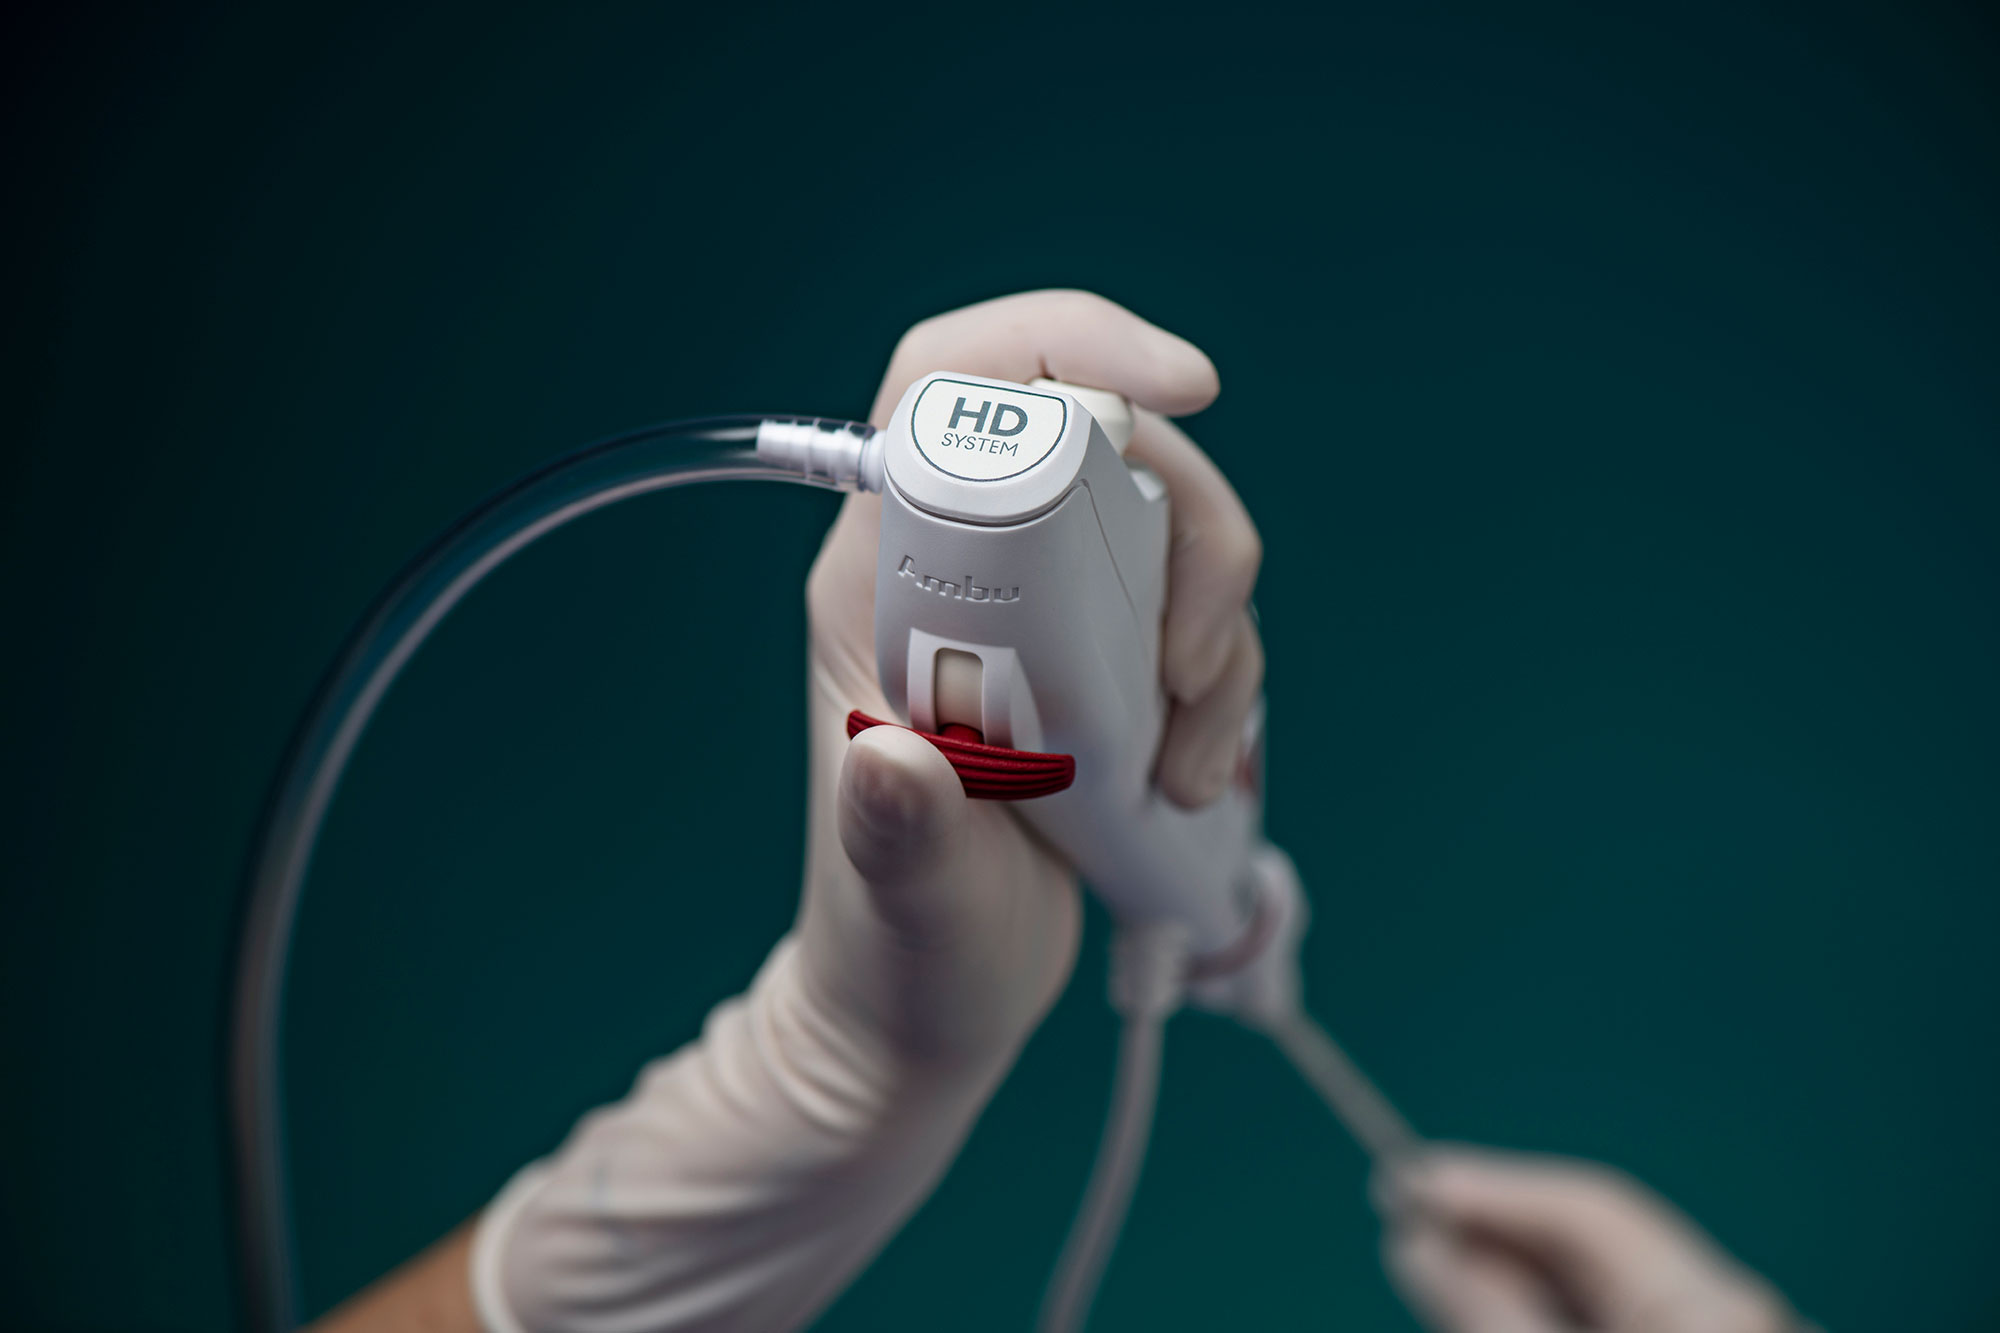 Ambu bronchoscope demonstrates superior clinical improvement over existing devices on the market.